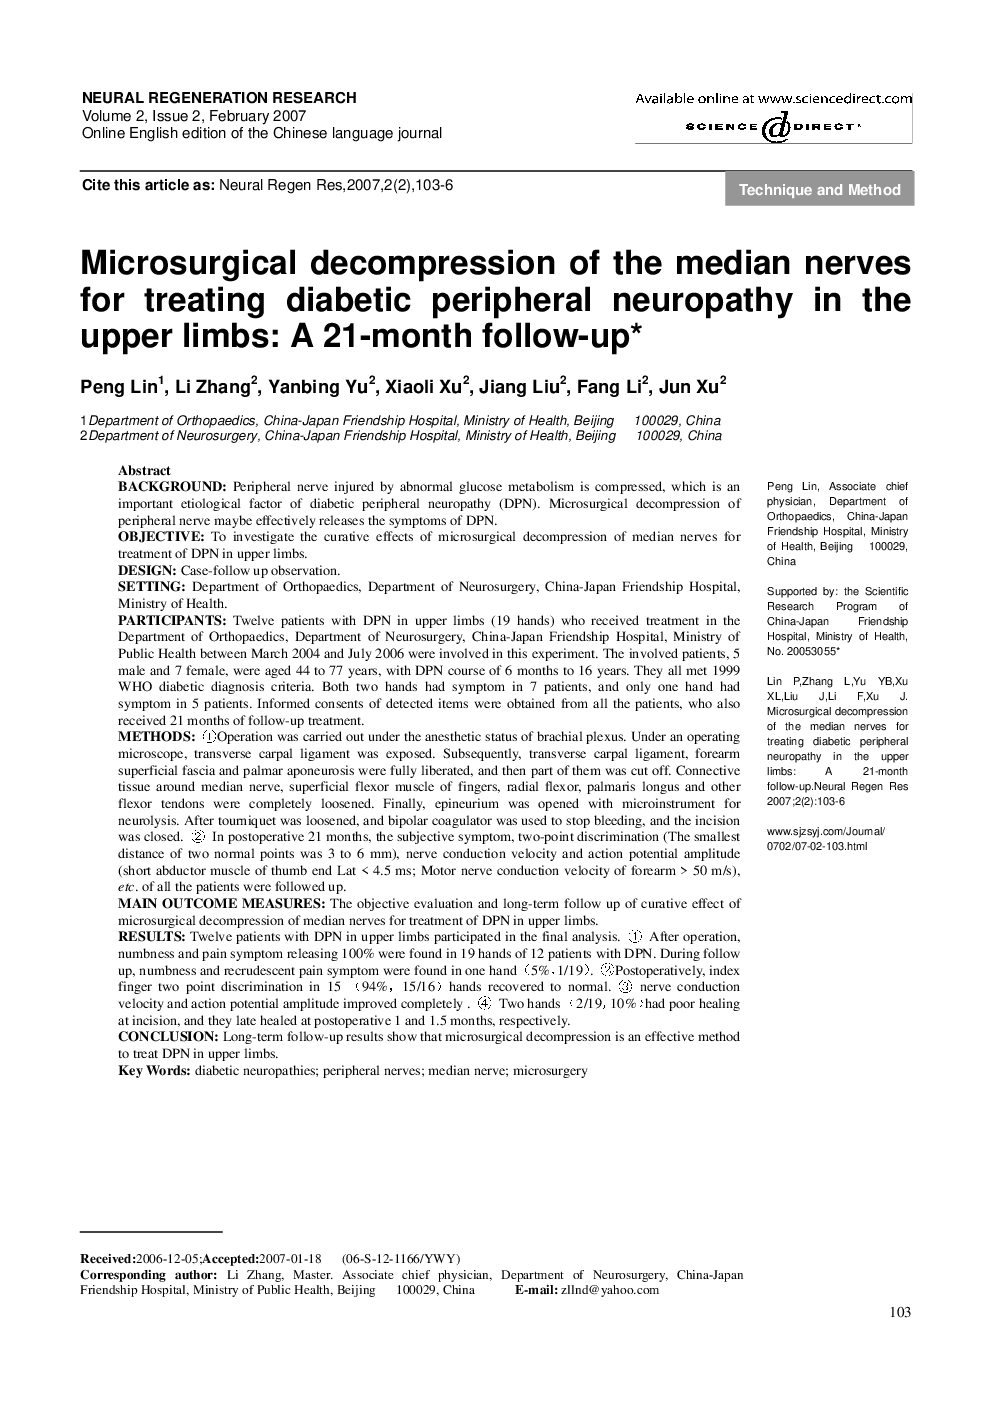 Microsurgical decompression of the median nerves for treating diabetic peripheral neuropathy in the upper limbs: A 21-month follow-up*